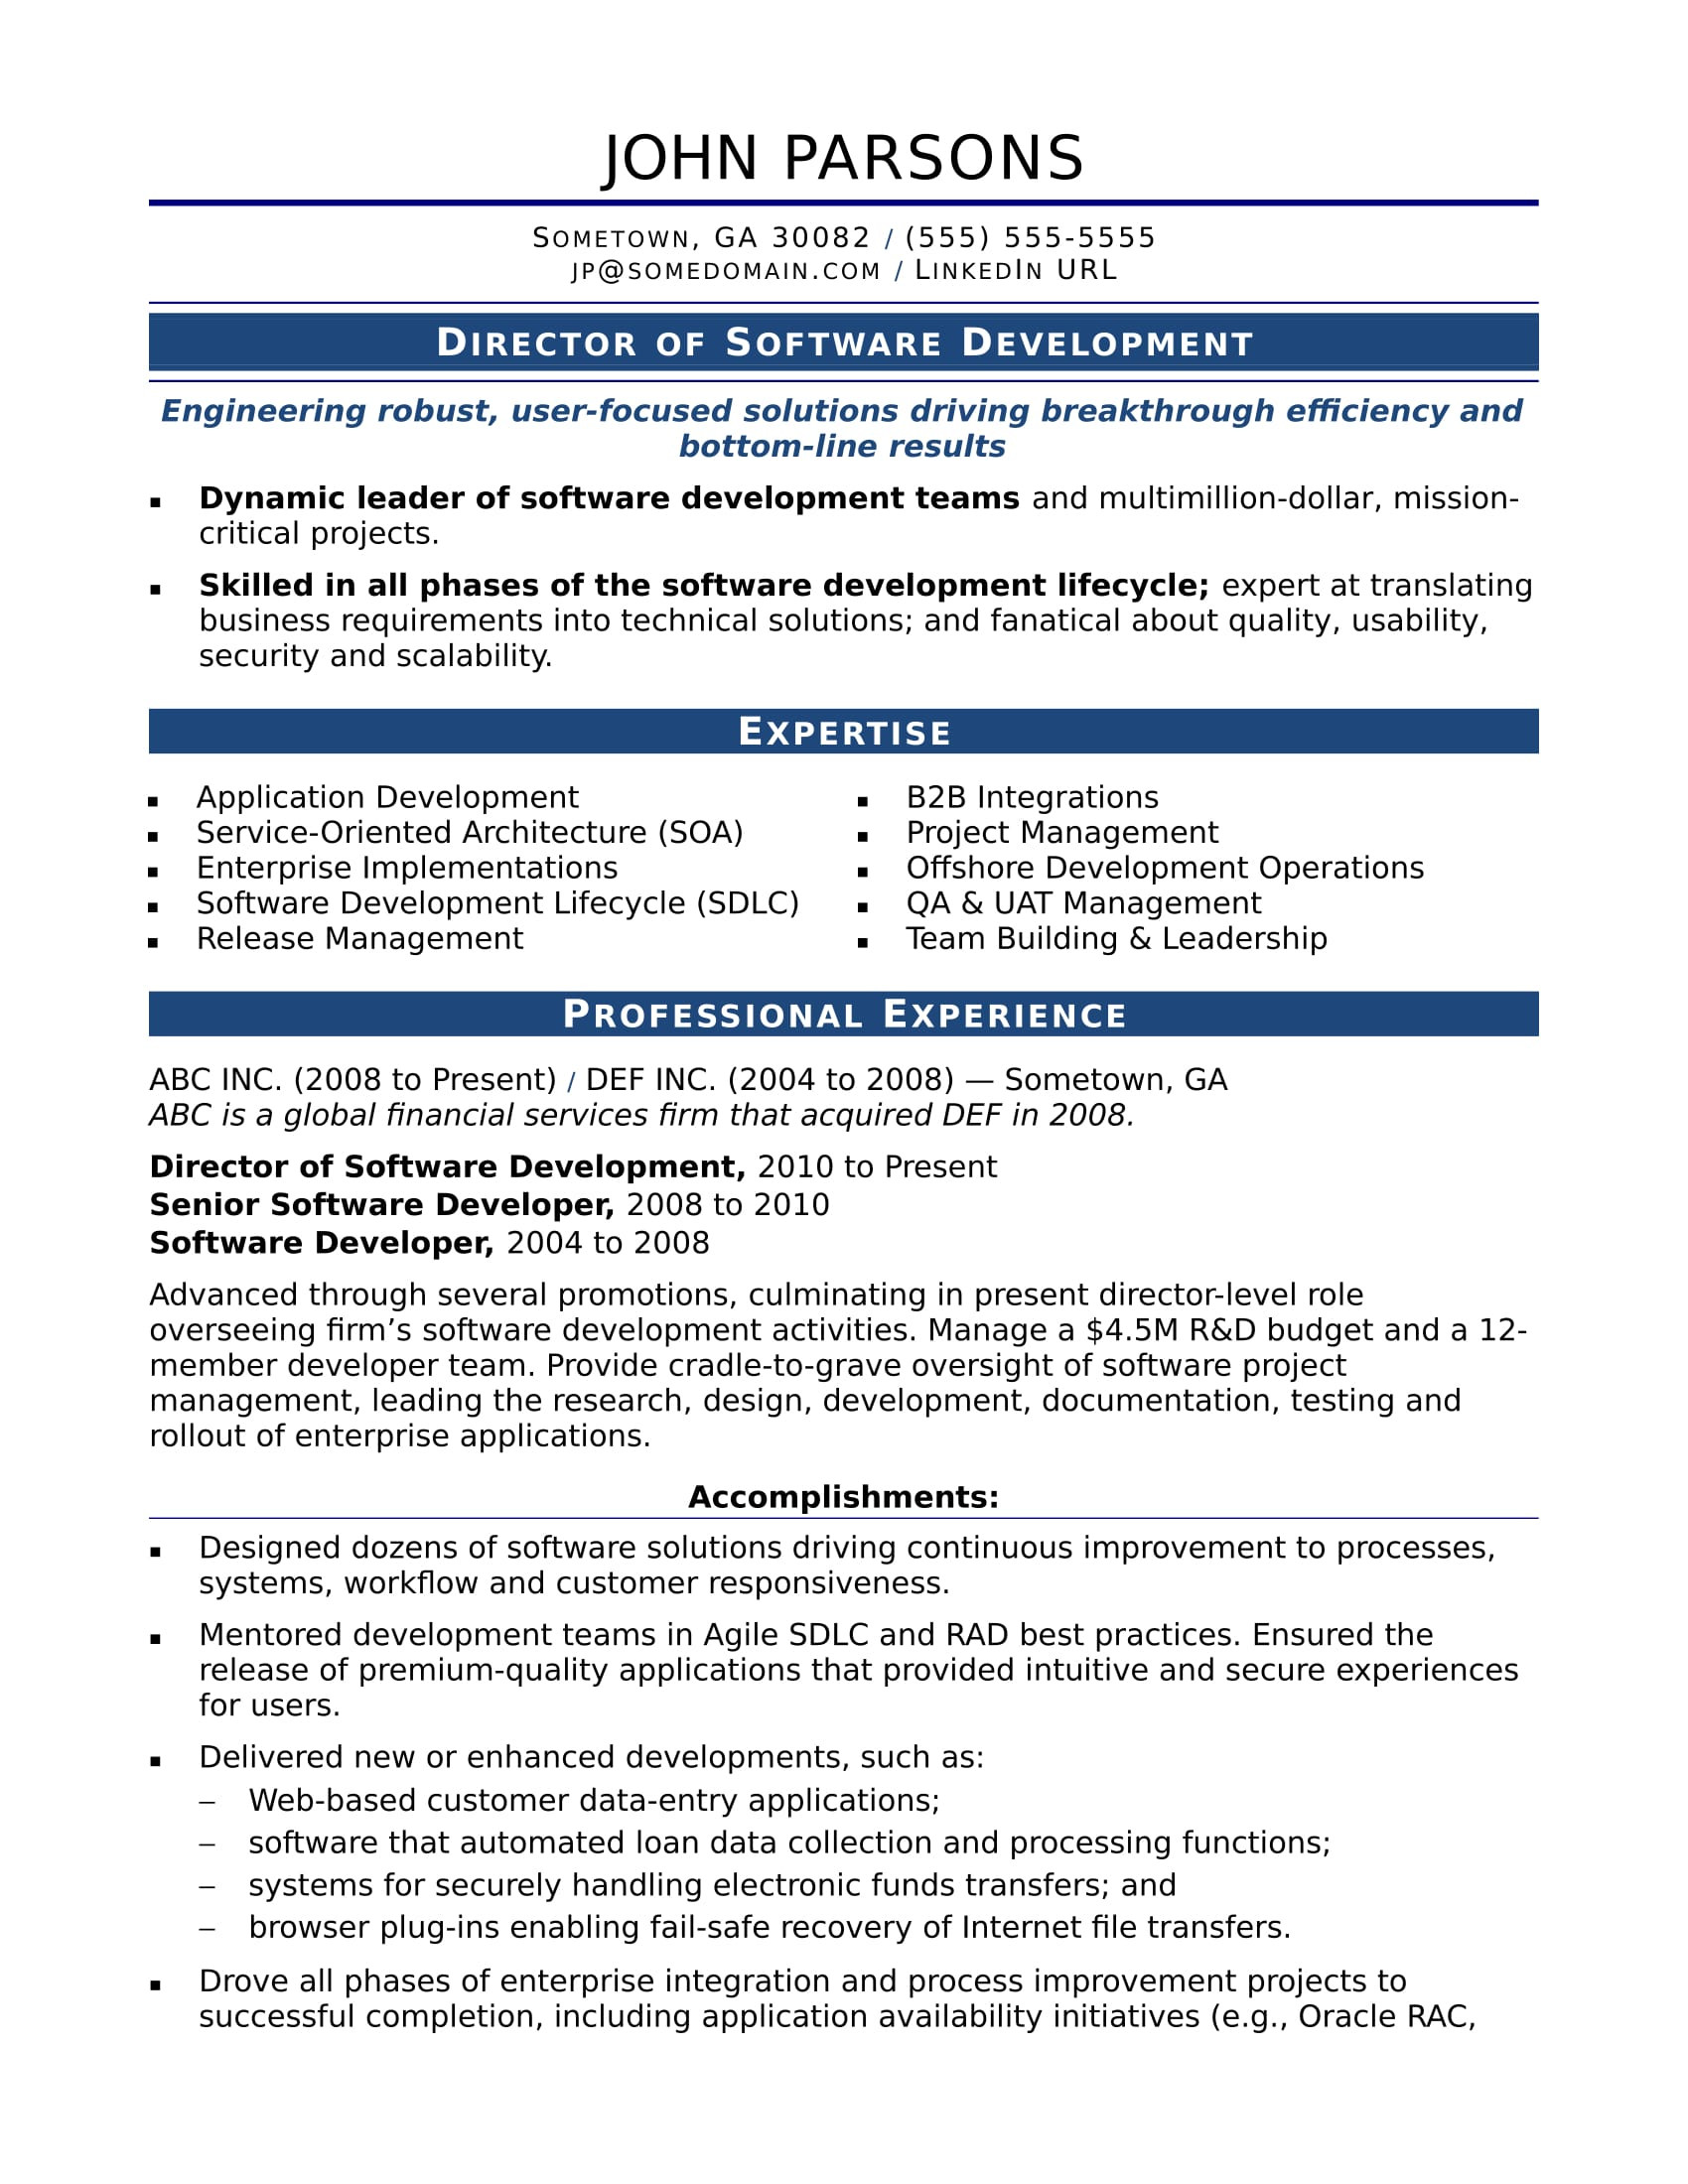 Resume Template for Experienced It Professionals Sample Resume for An Experienced It Developer Monster.com